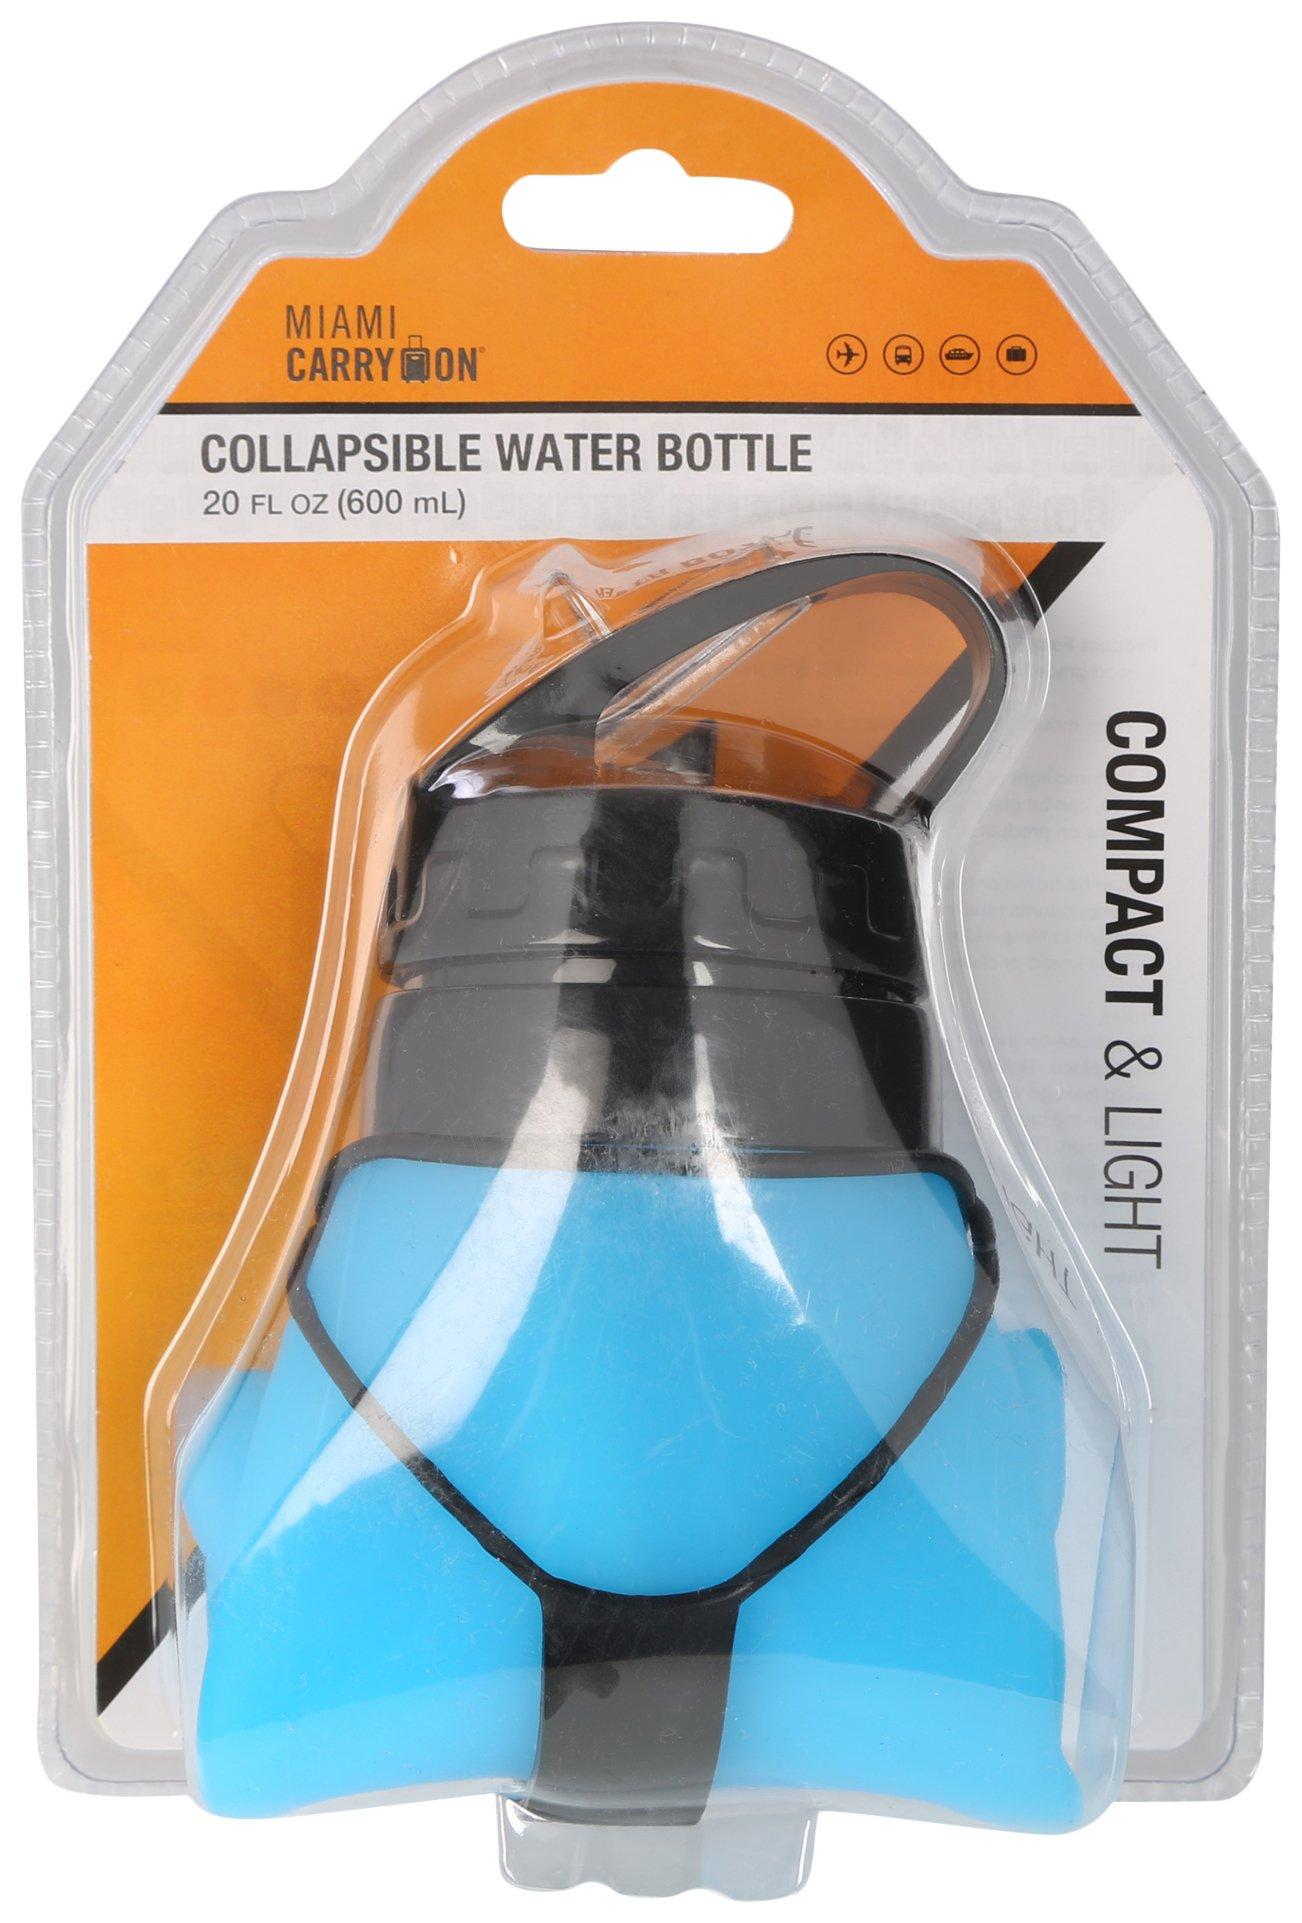 Miami Carry On 20 Oz. Collapsible Water Bottle